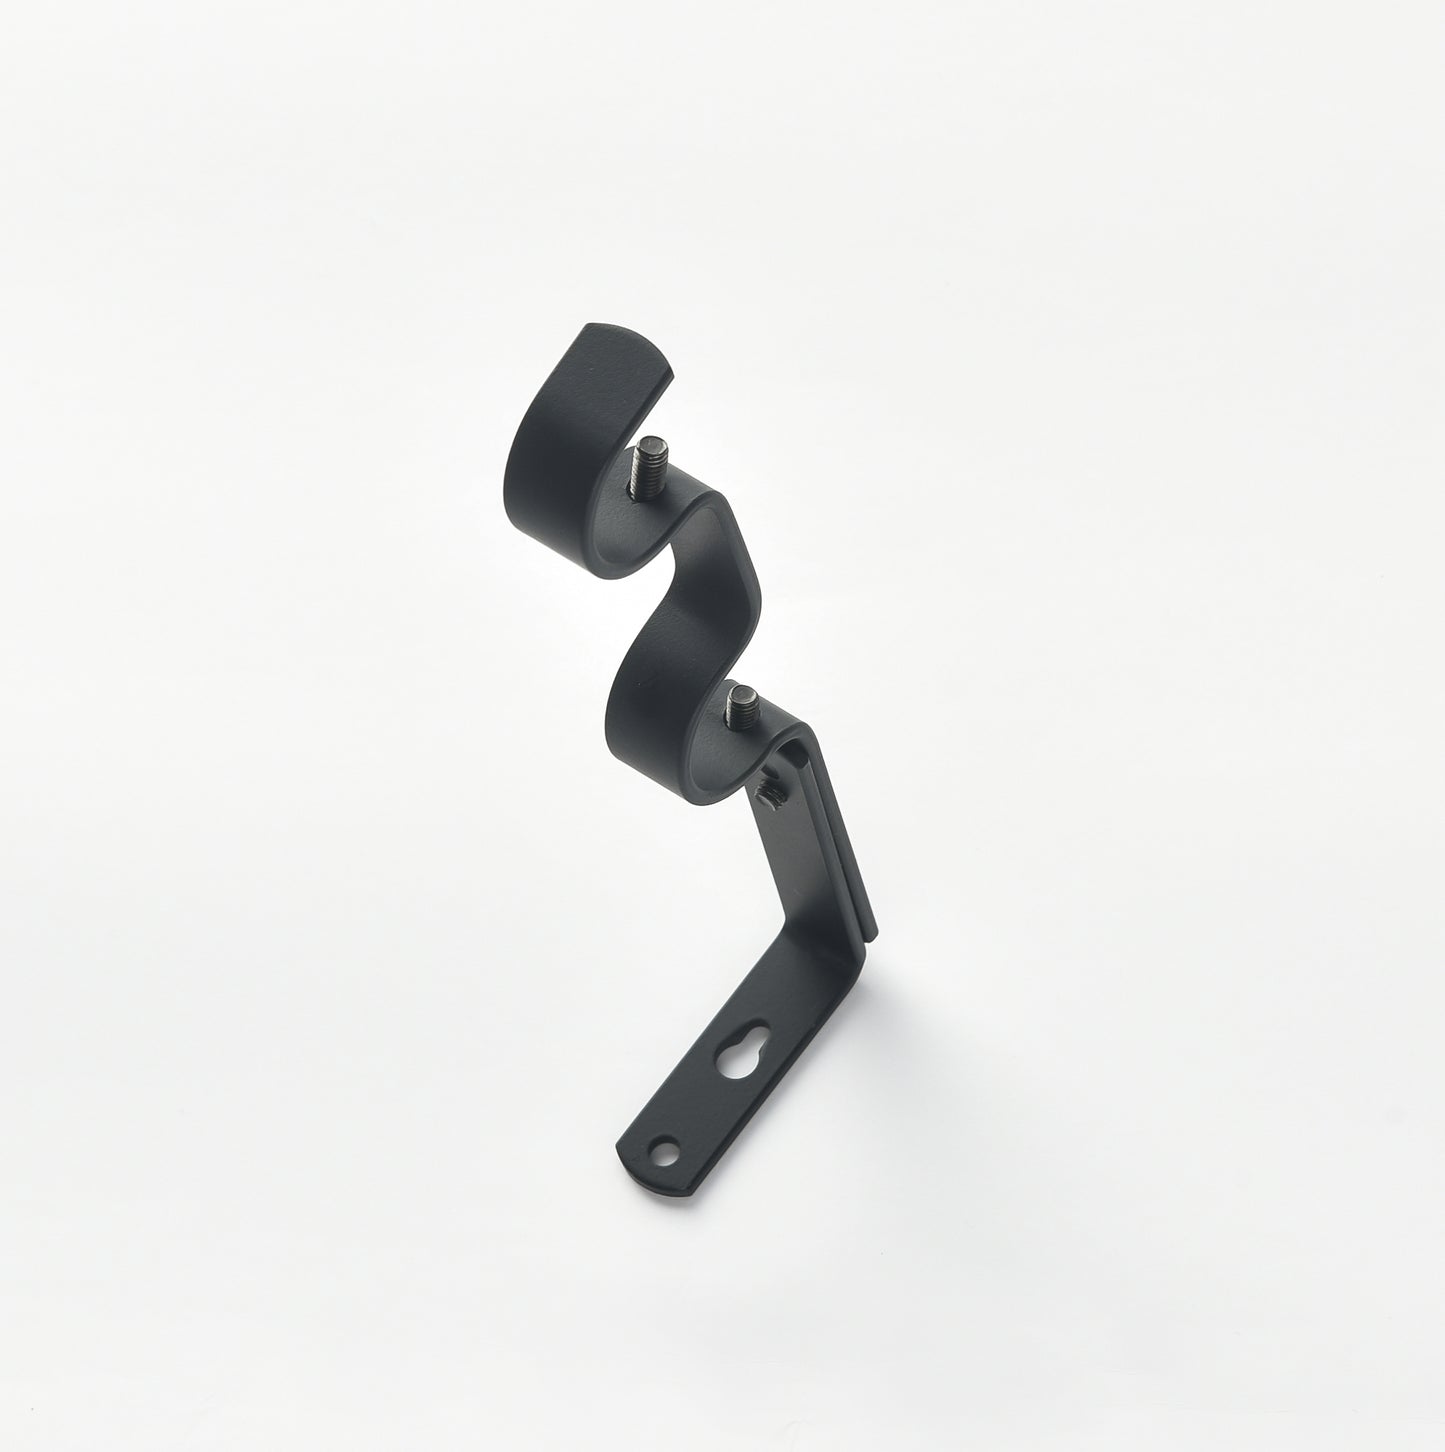 Metal Curtain Rod Bracket for Double Rods